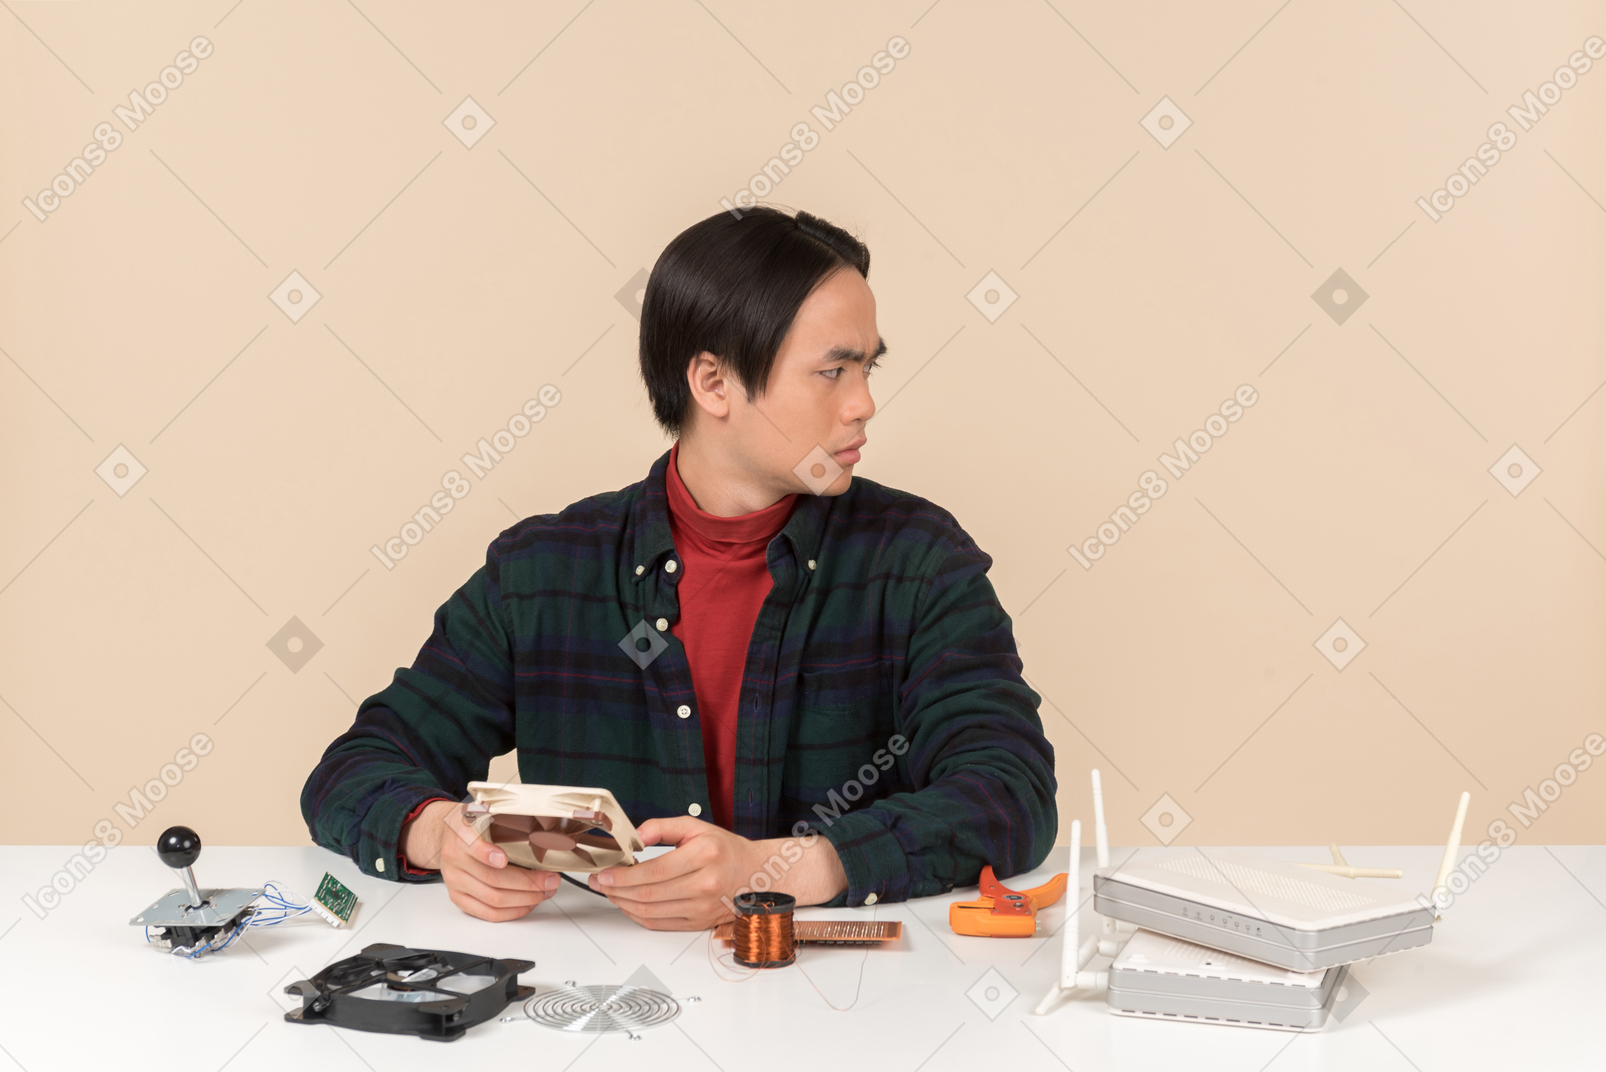 An asian geek guy in a dark checkered shirt, working with computer details